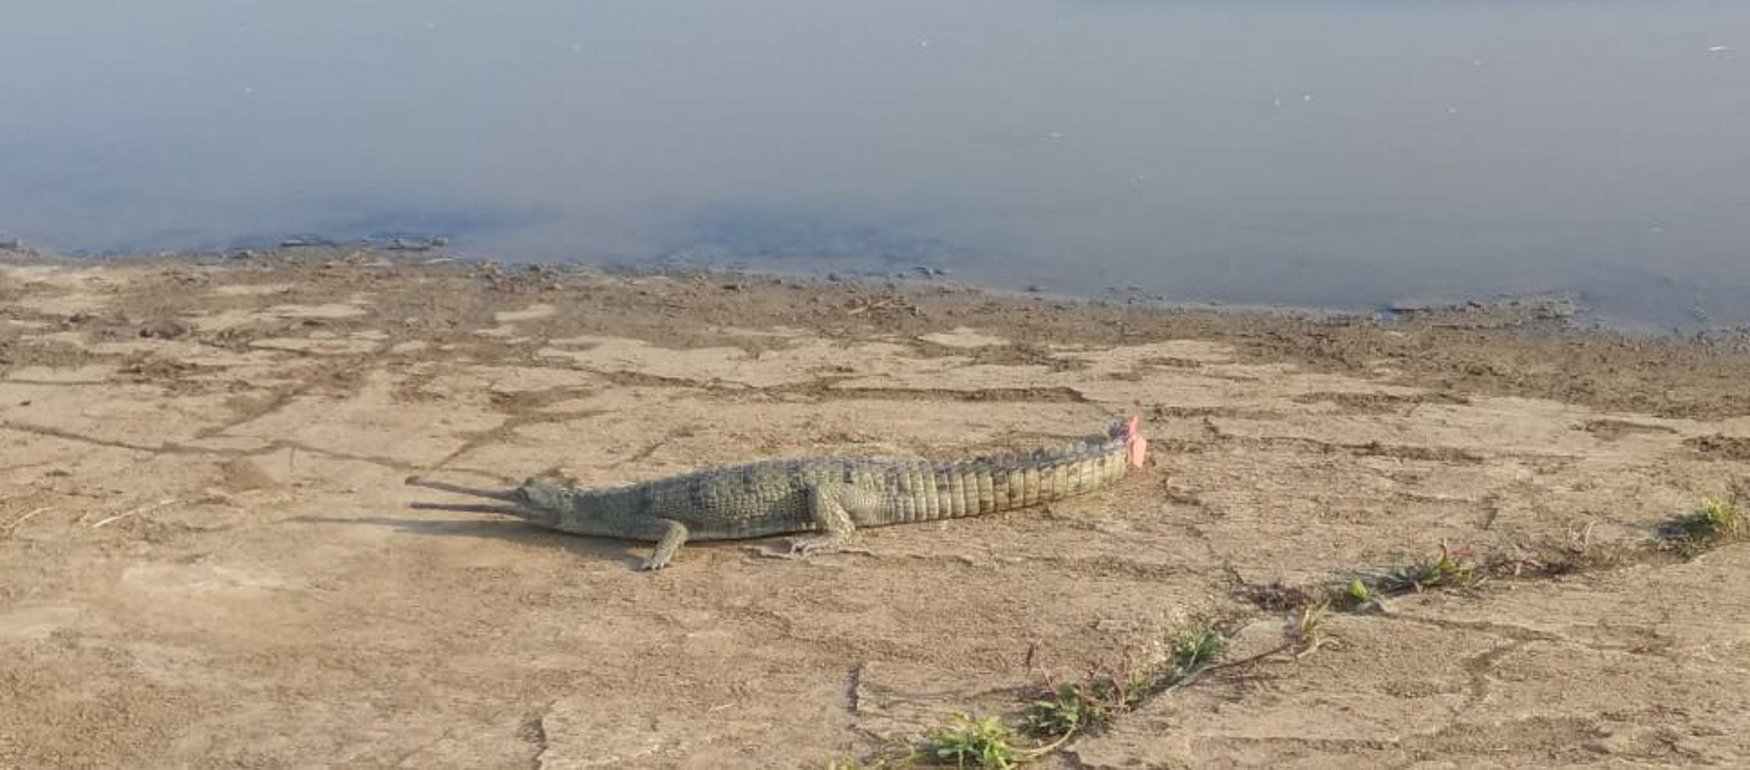 Generation of stopped watches at Son Gharial Sanctuary